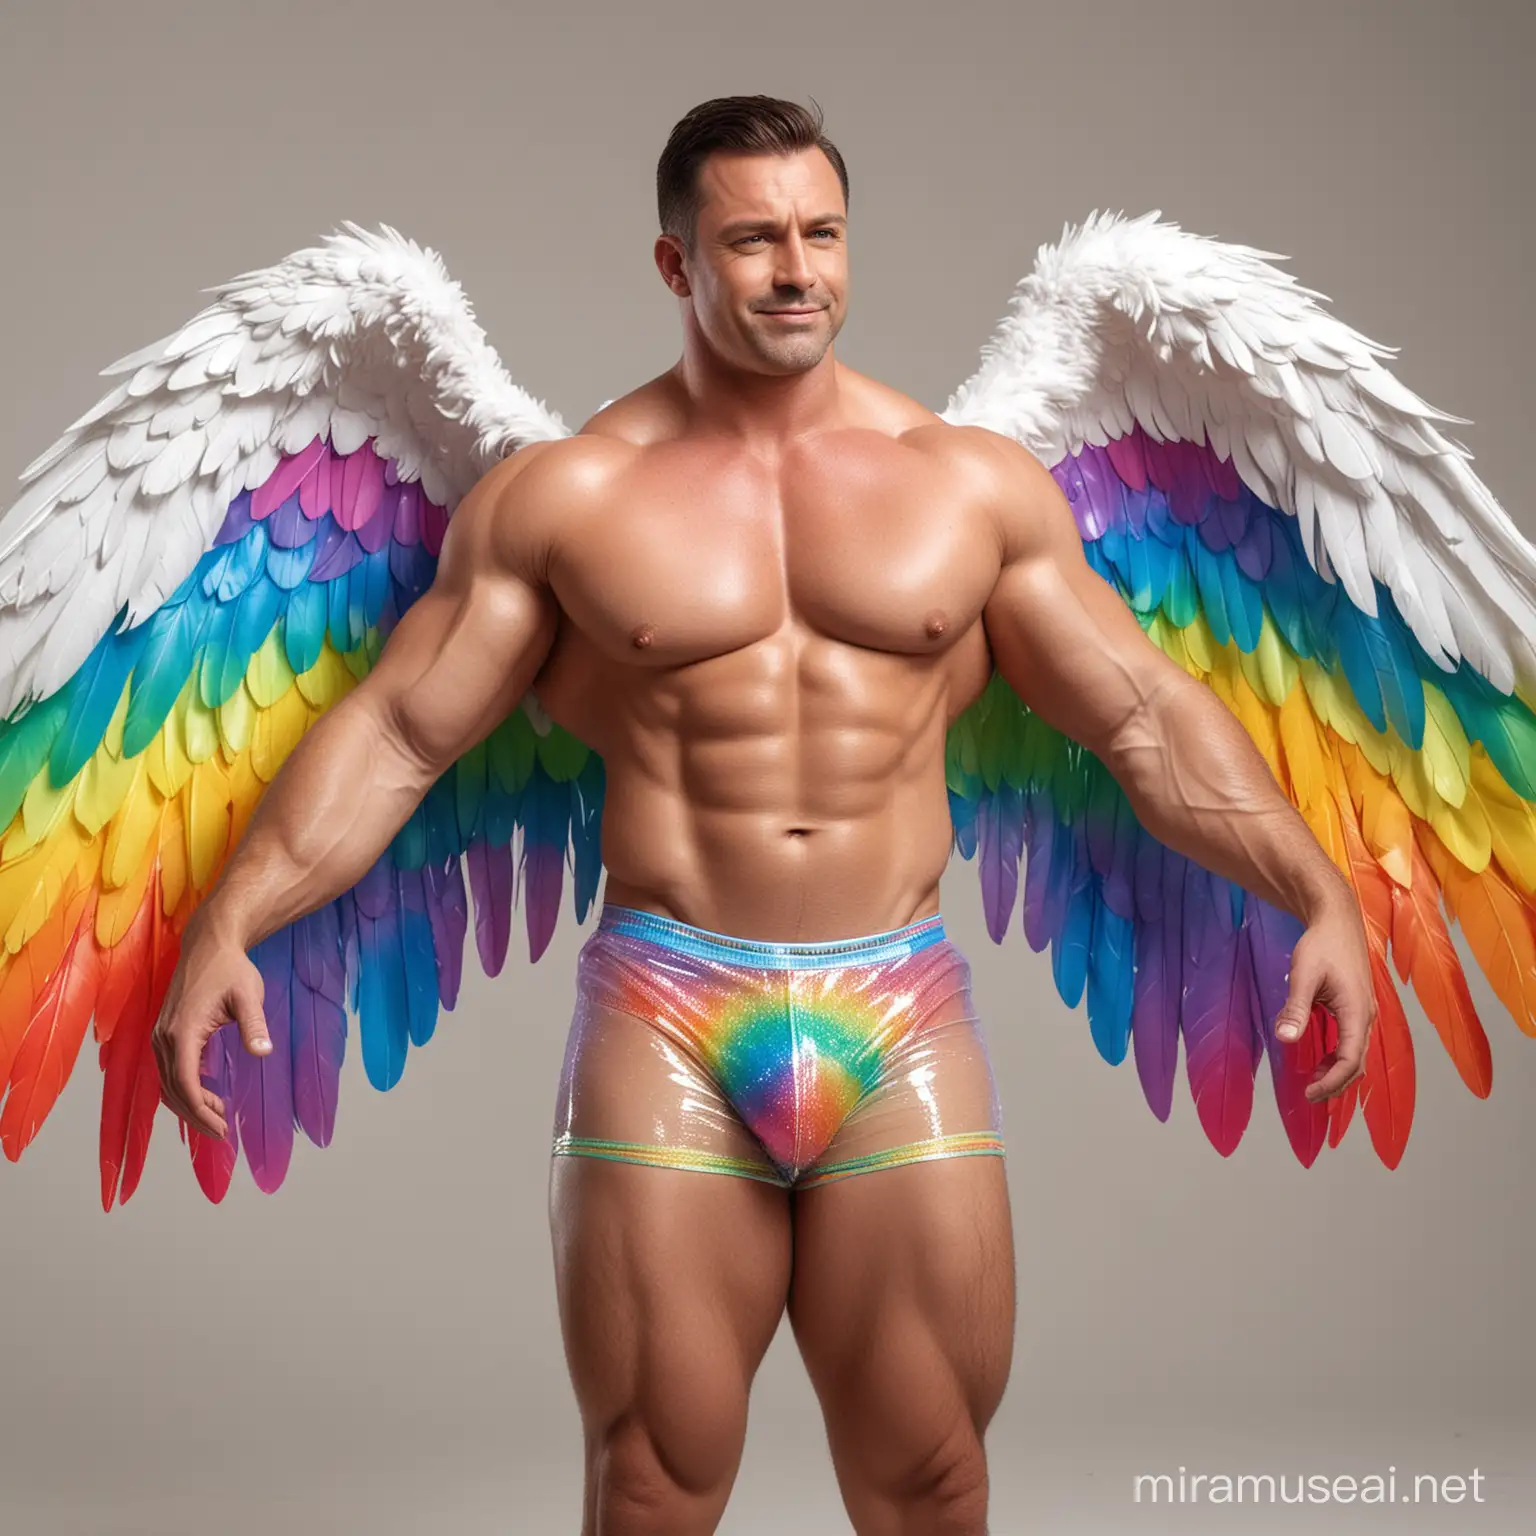 Muscular Bodybuilder Flexing with Rainbow Eagle Wings and Doraemon